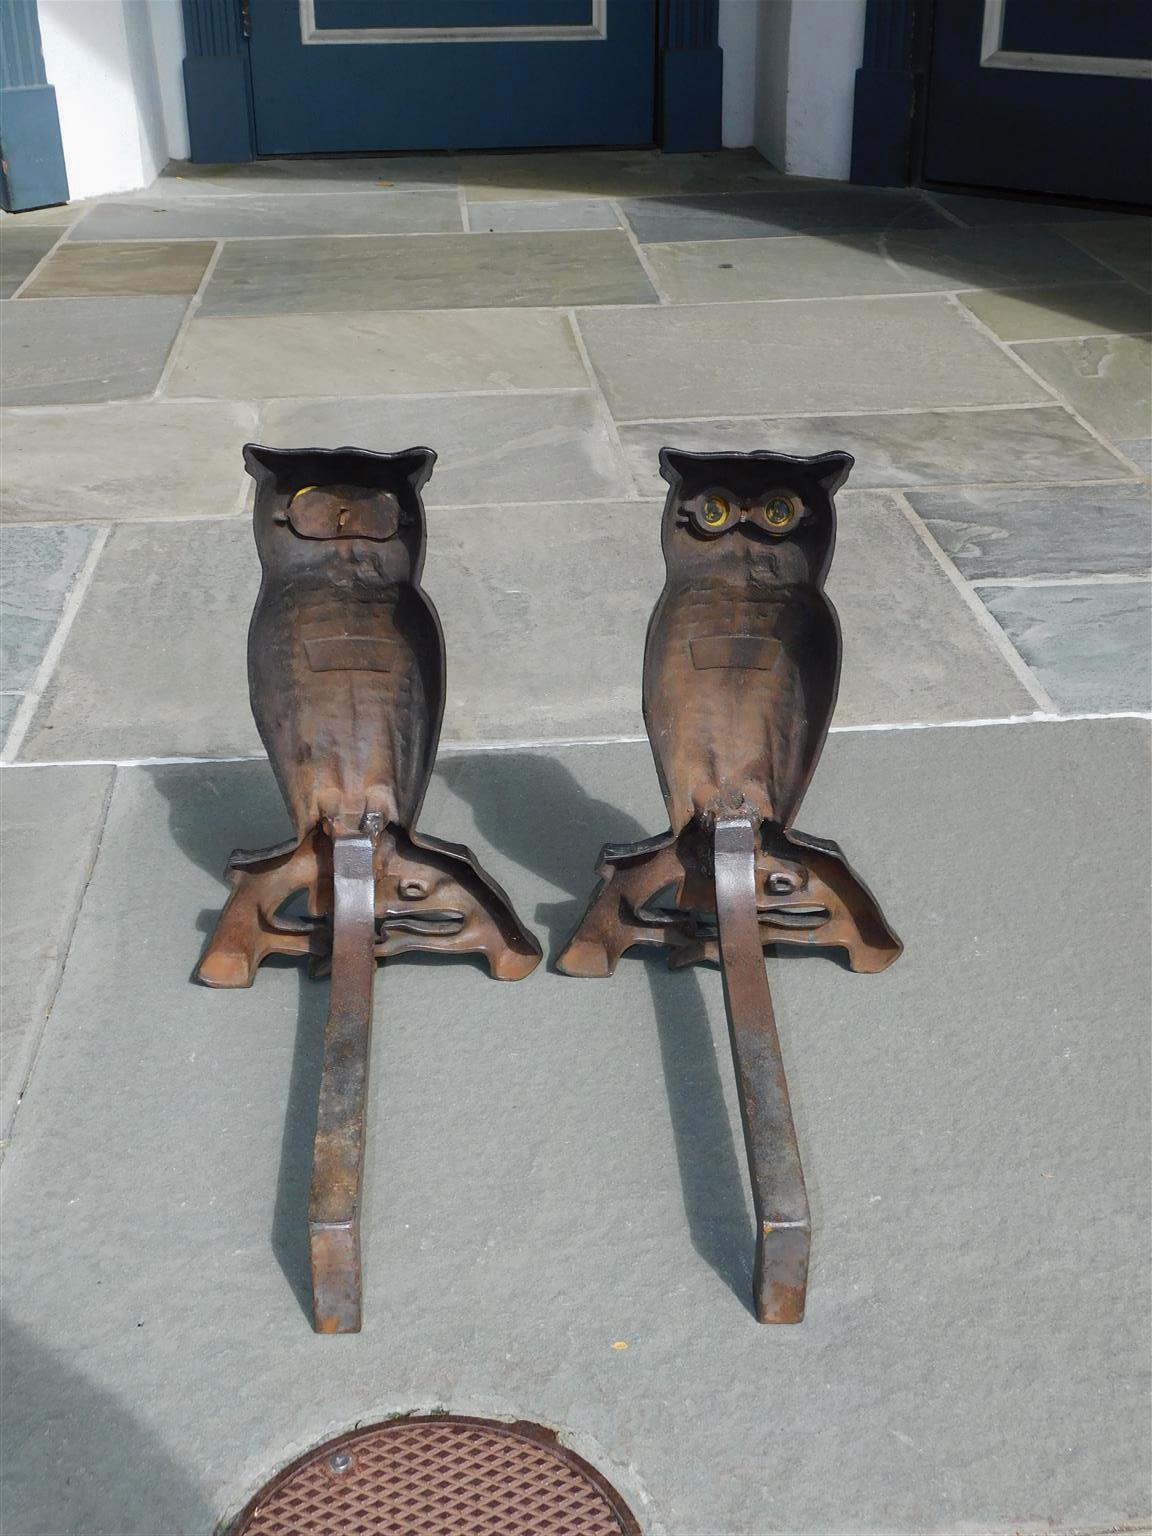 antique owl andirons with glass eyes